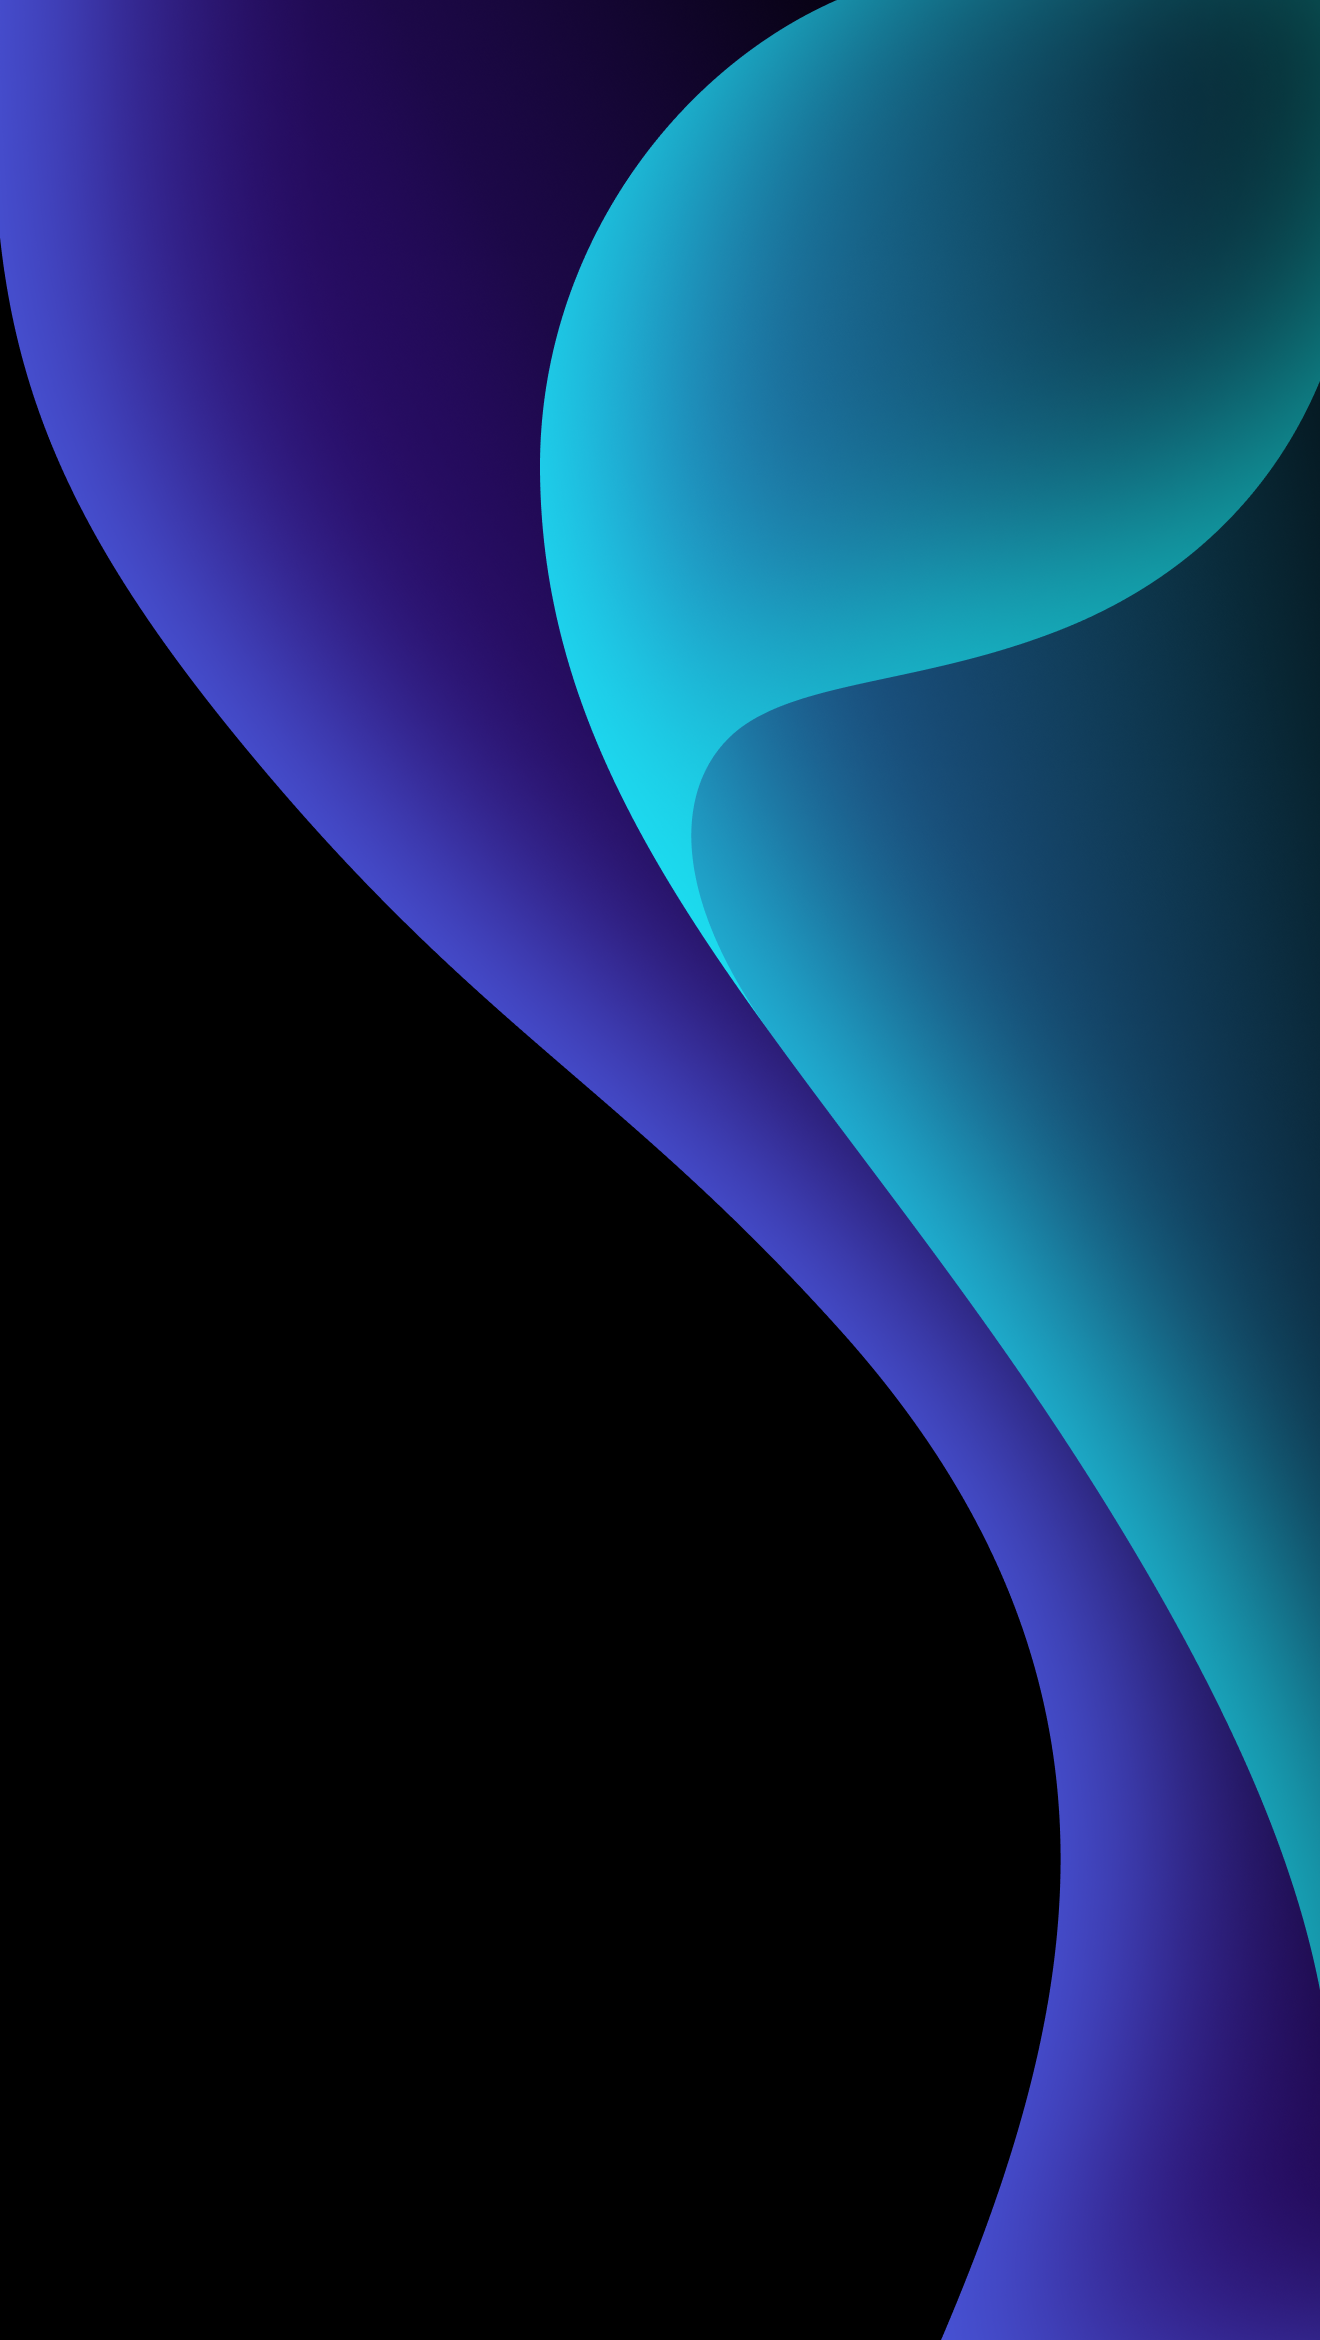 OLED optimized Fold wallpapers for iPhoneidownloadblog